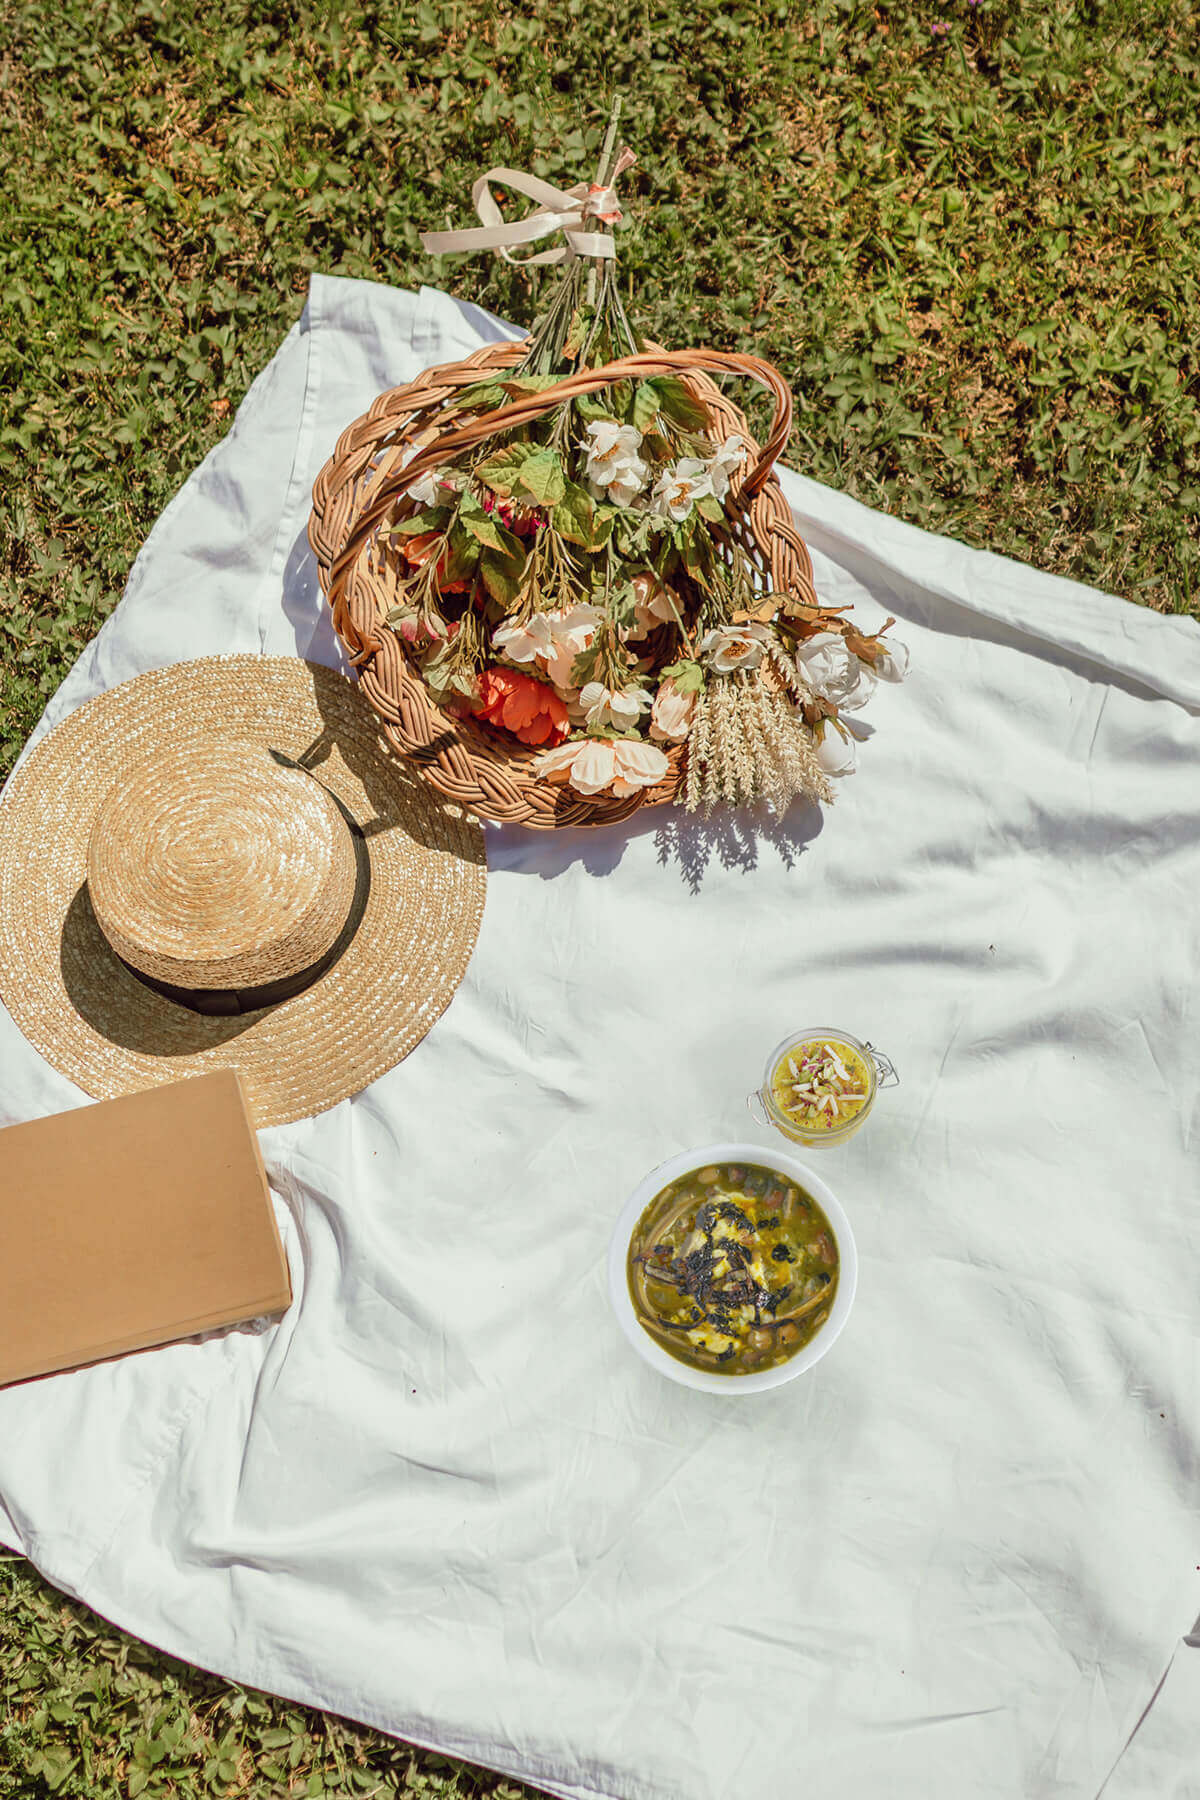 Top view of a picnic blanket with a straw hat, flowers and foods eaten for sizdah bidar